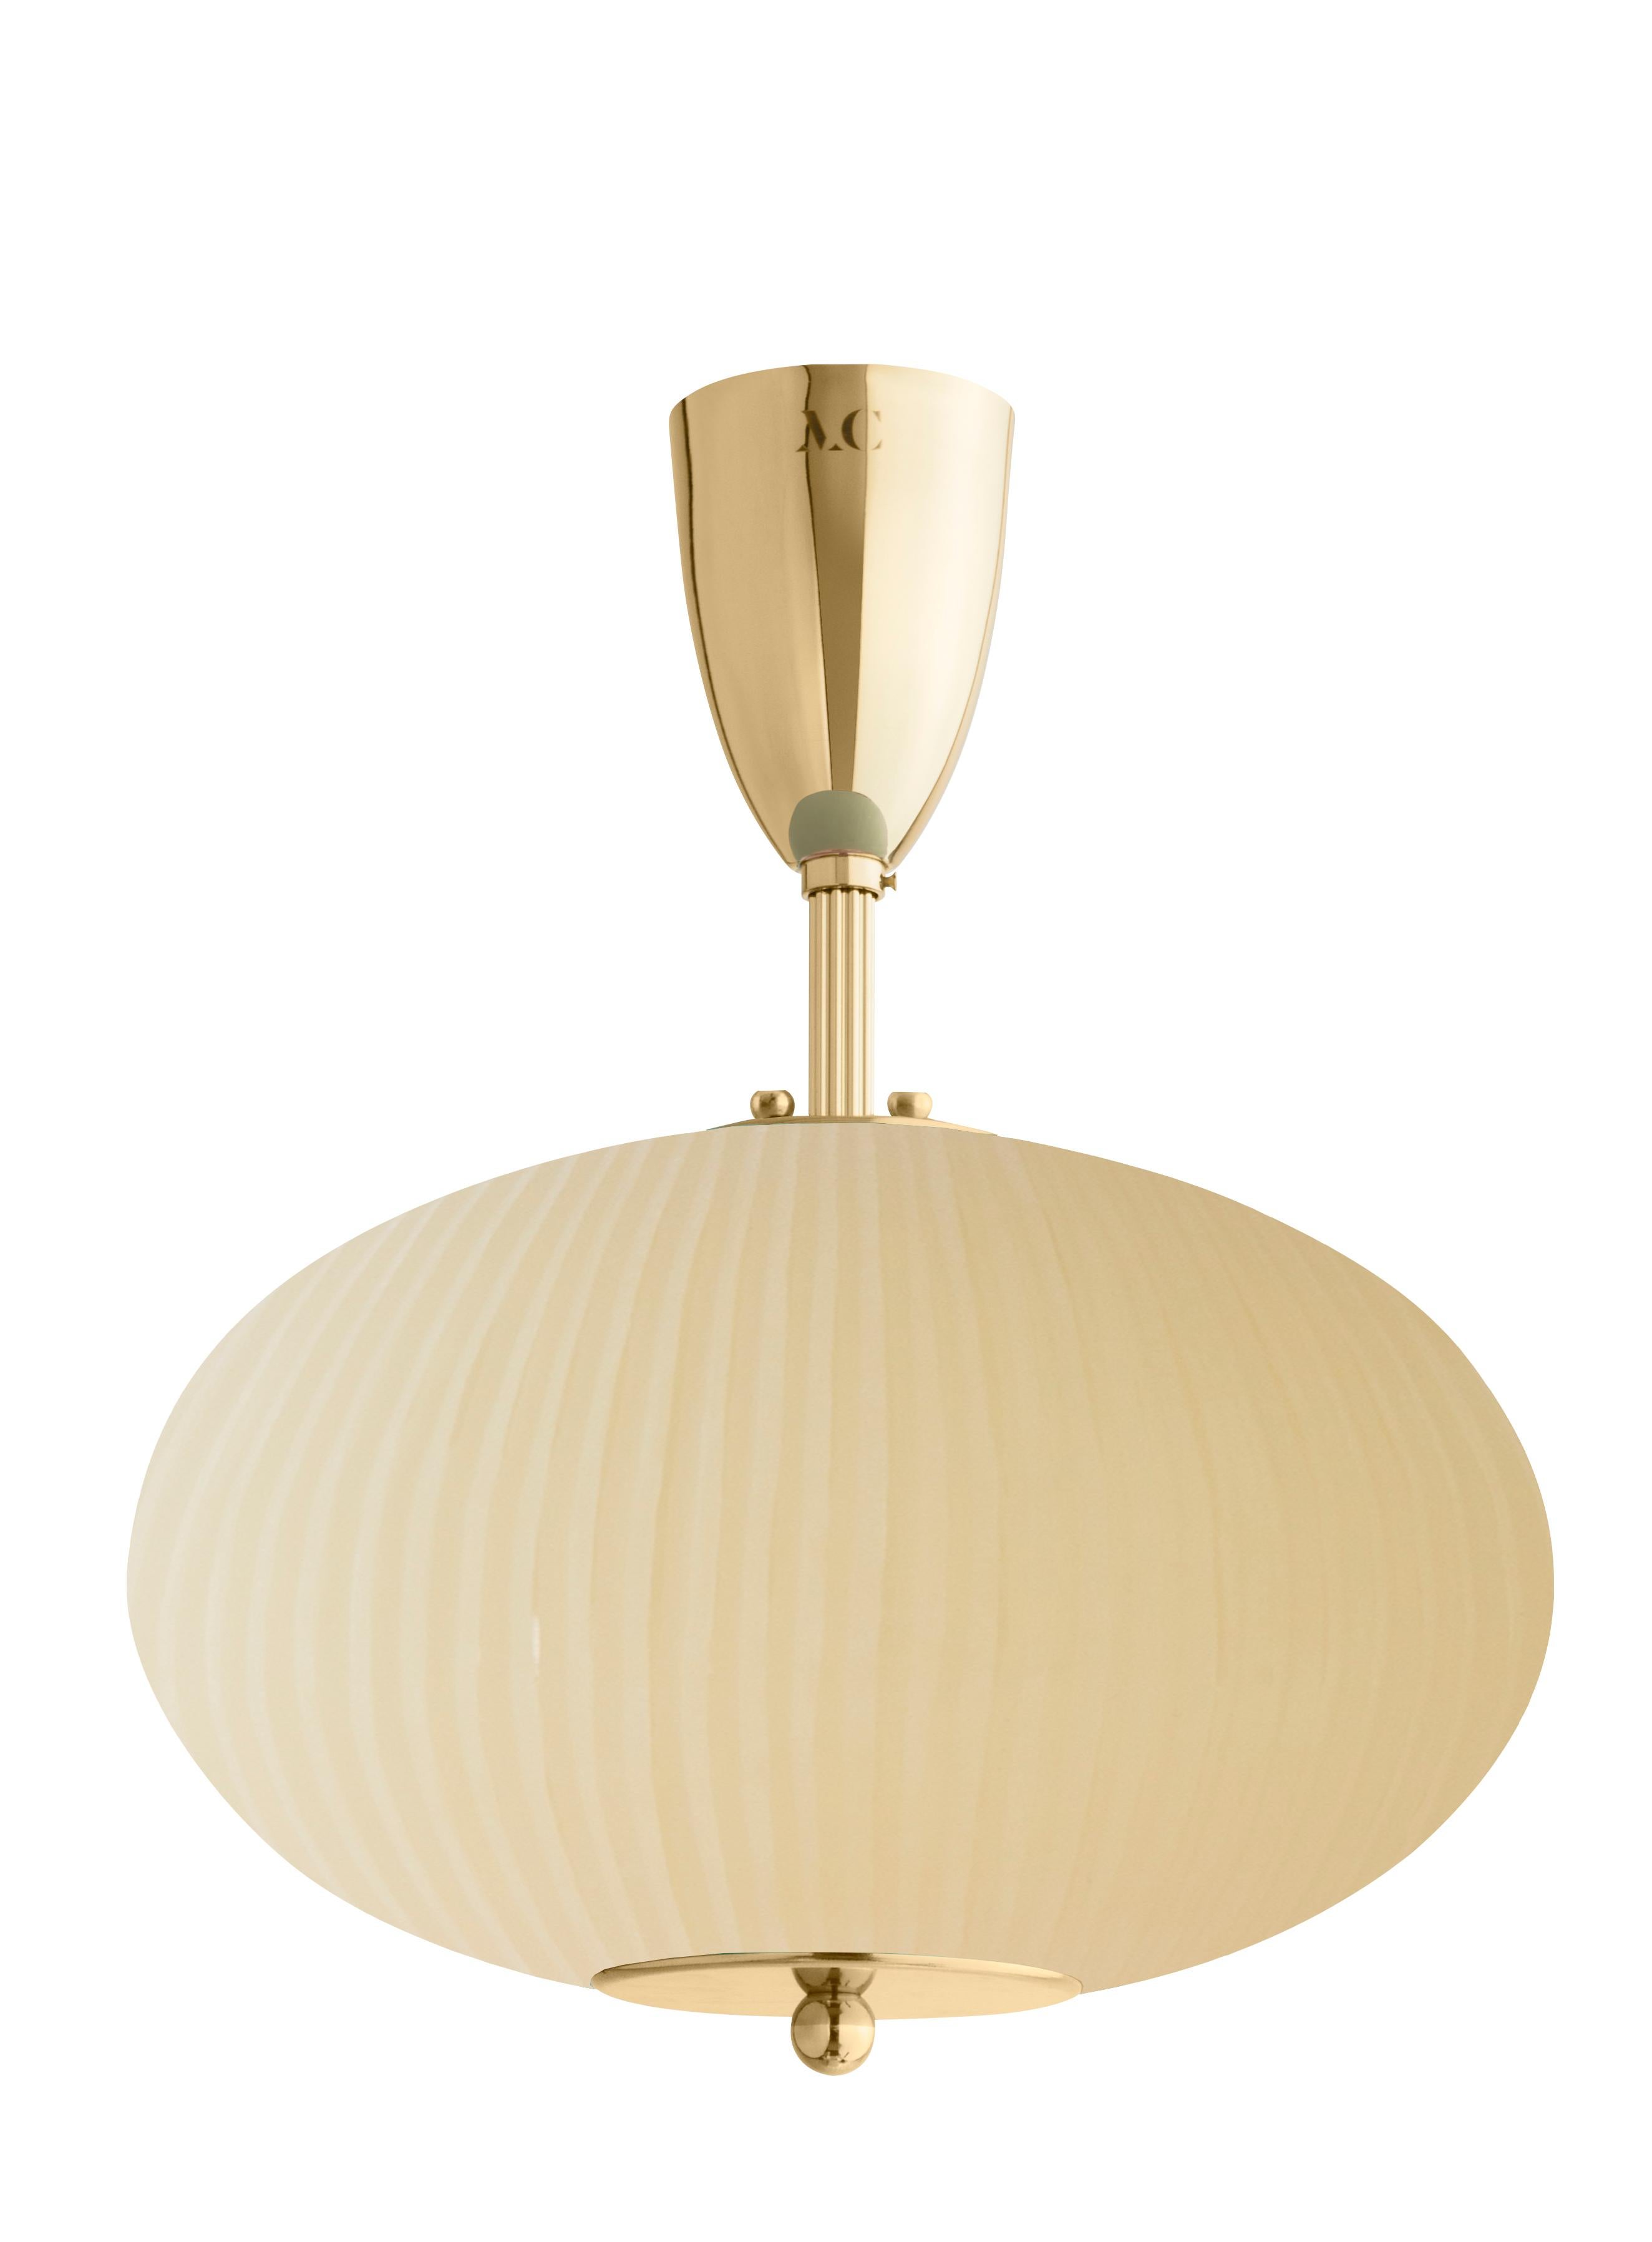 Ceiling lamp China 07 by Magic Circus Editions
Dimensions: H 40 x W 32 x D 32 cm
Materials: Brass, mouth blown glass sculpted with a diamond saw
Colour: mustard yellow

Available finishes: Brass, nickel
Available colours: enamel soft white, soft